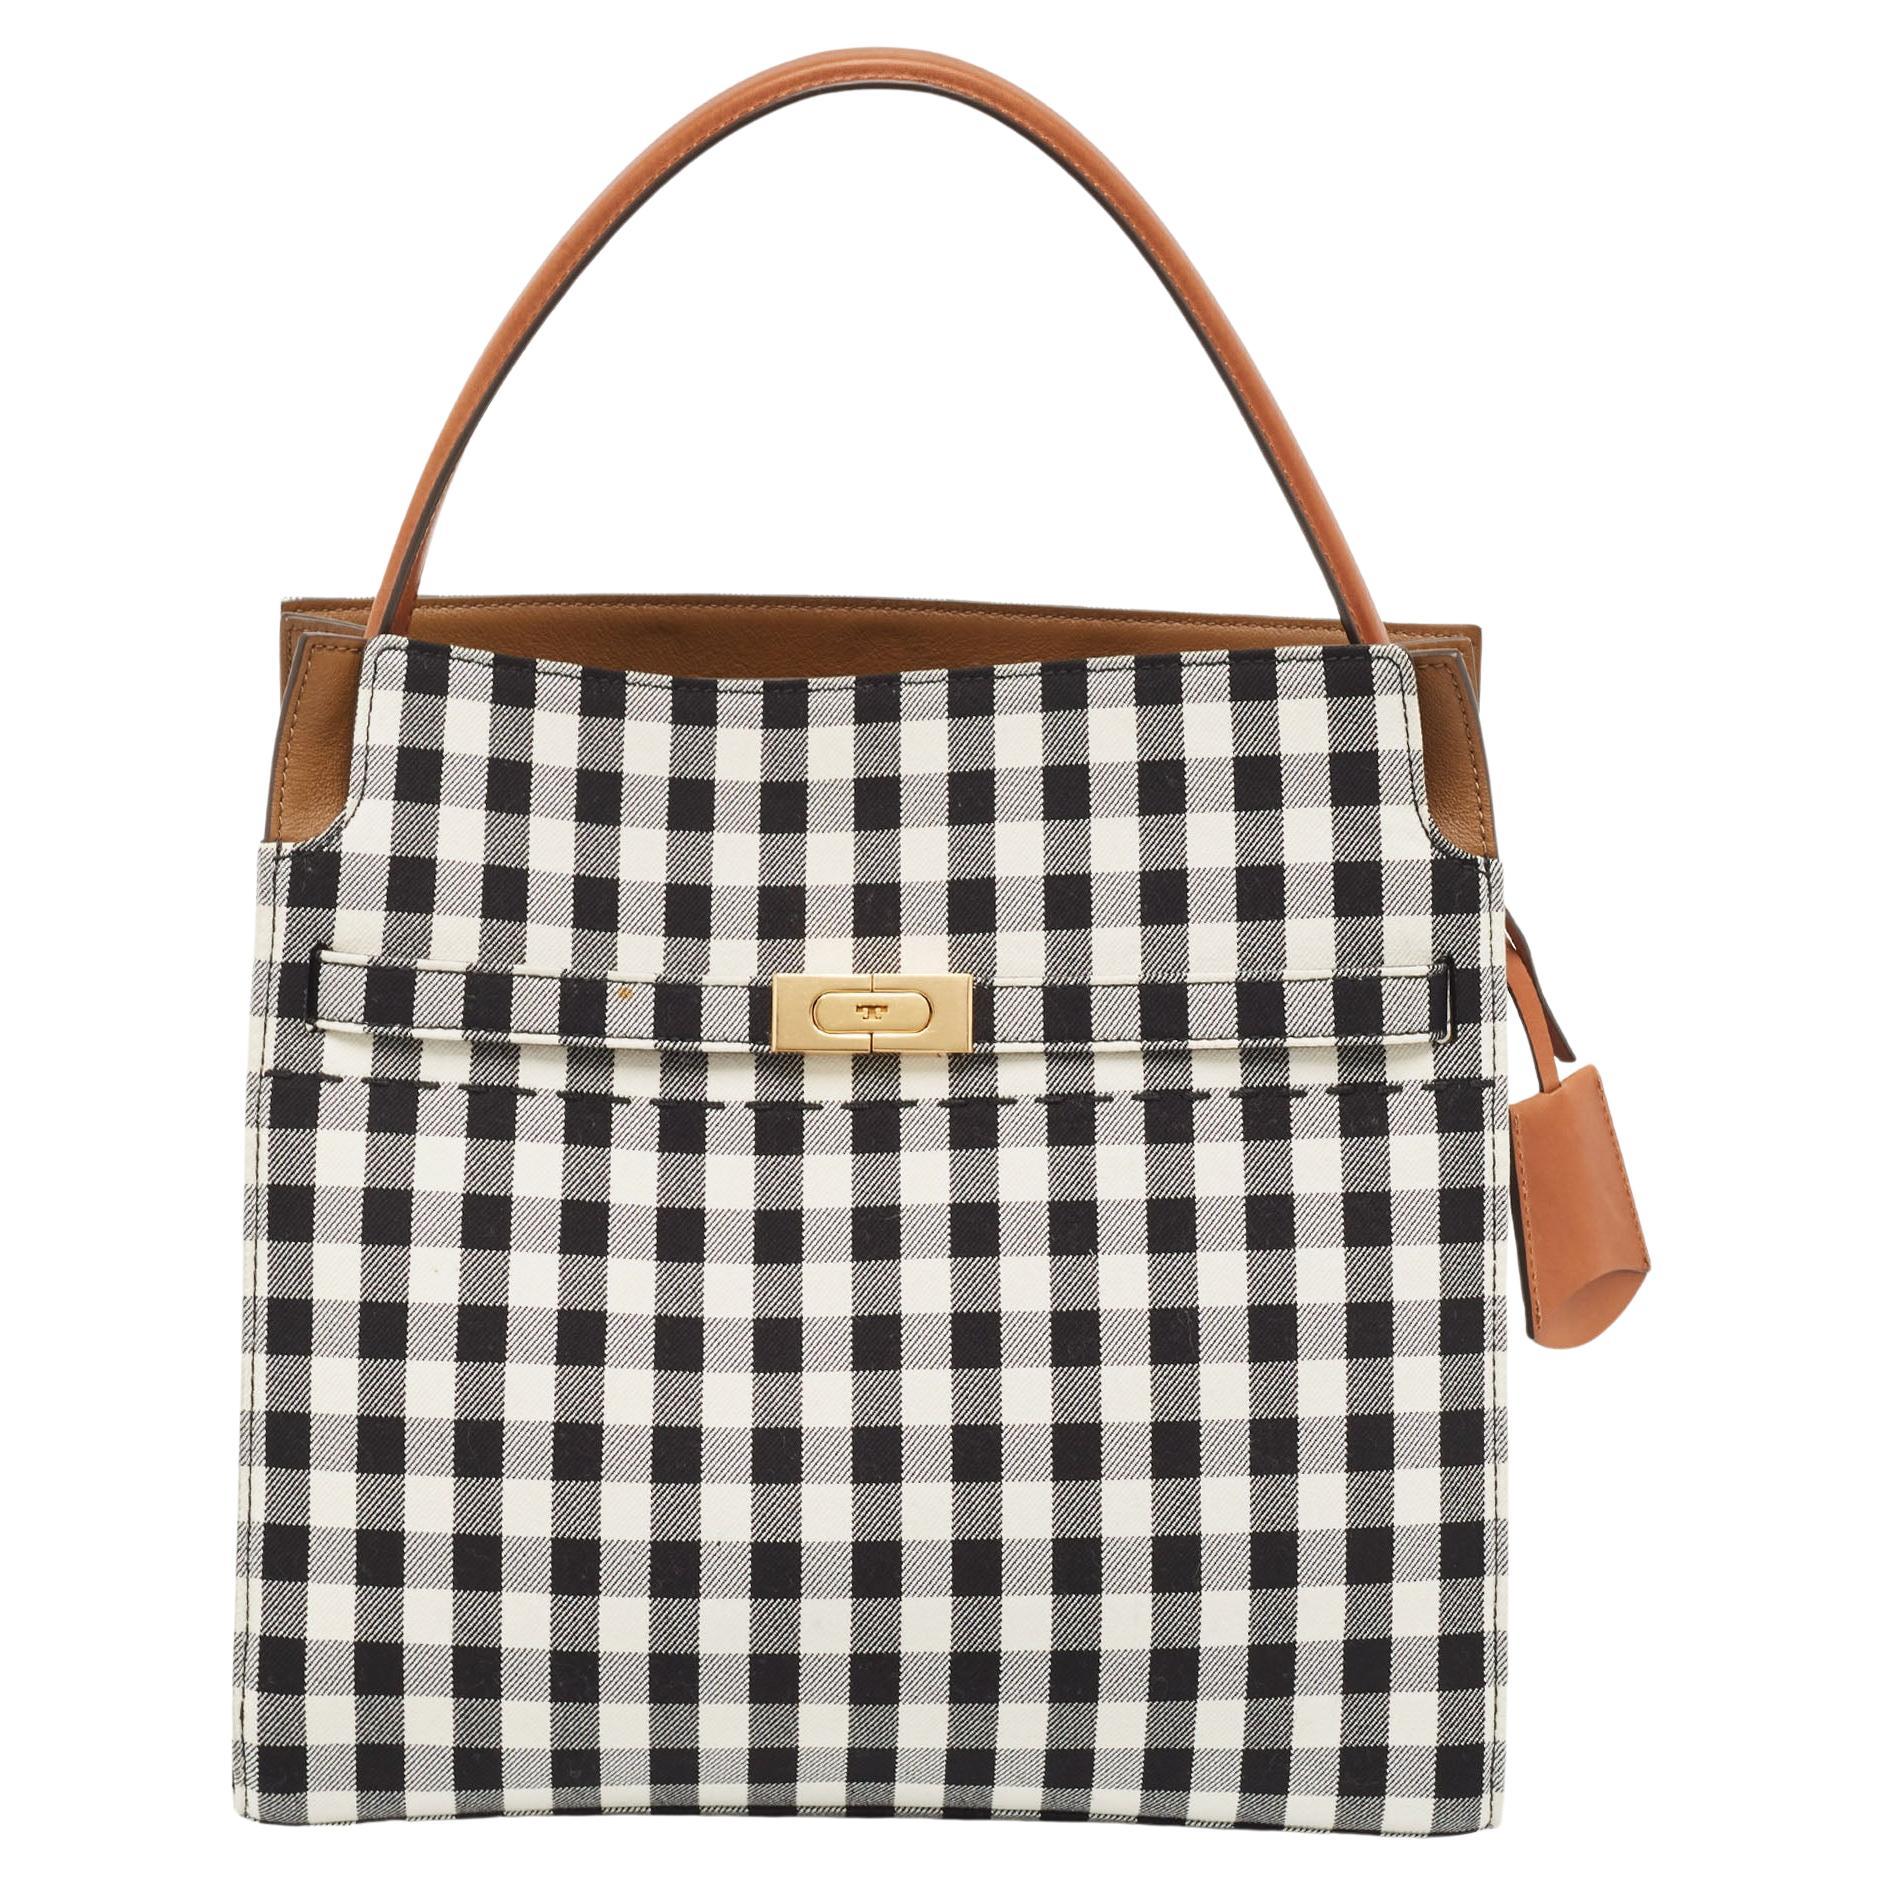 Tory Burch Black/White Checkered Canvas Lee Radziwill Top Handle Bag For Sale